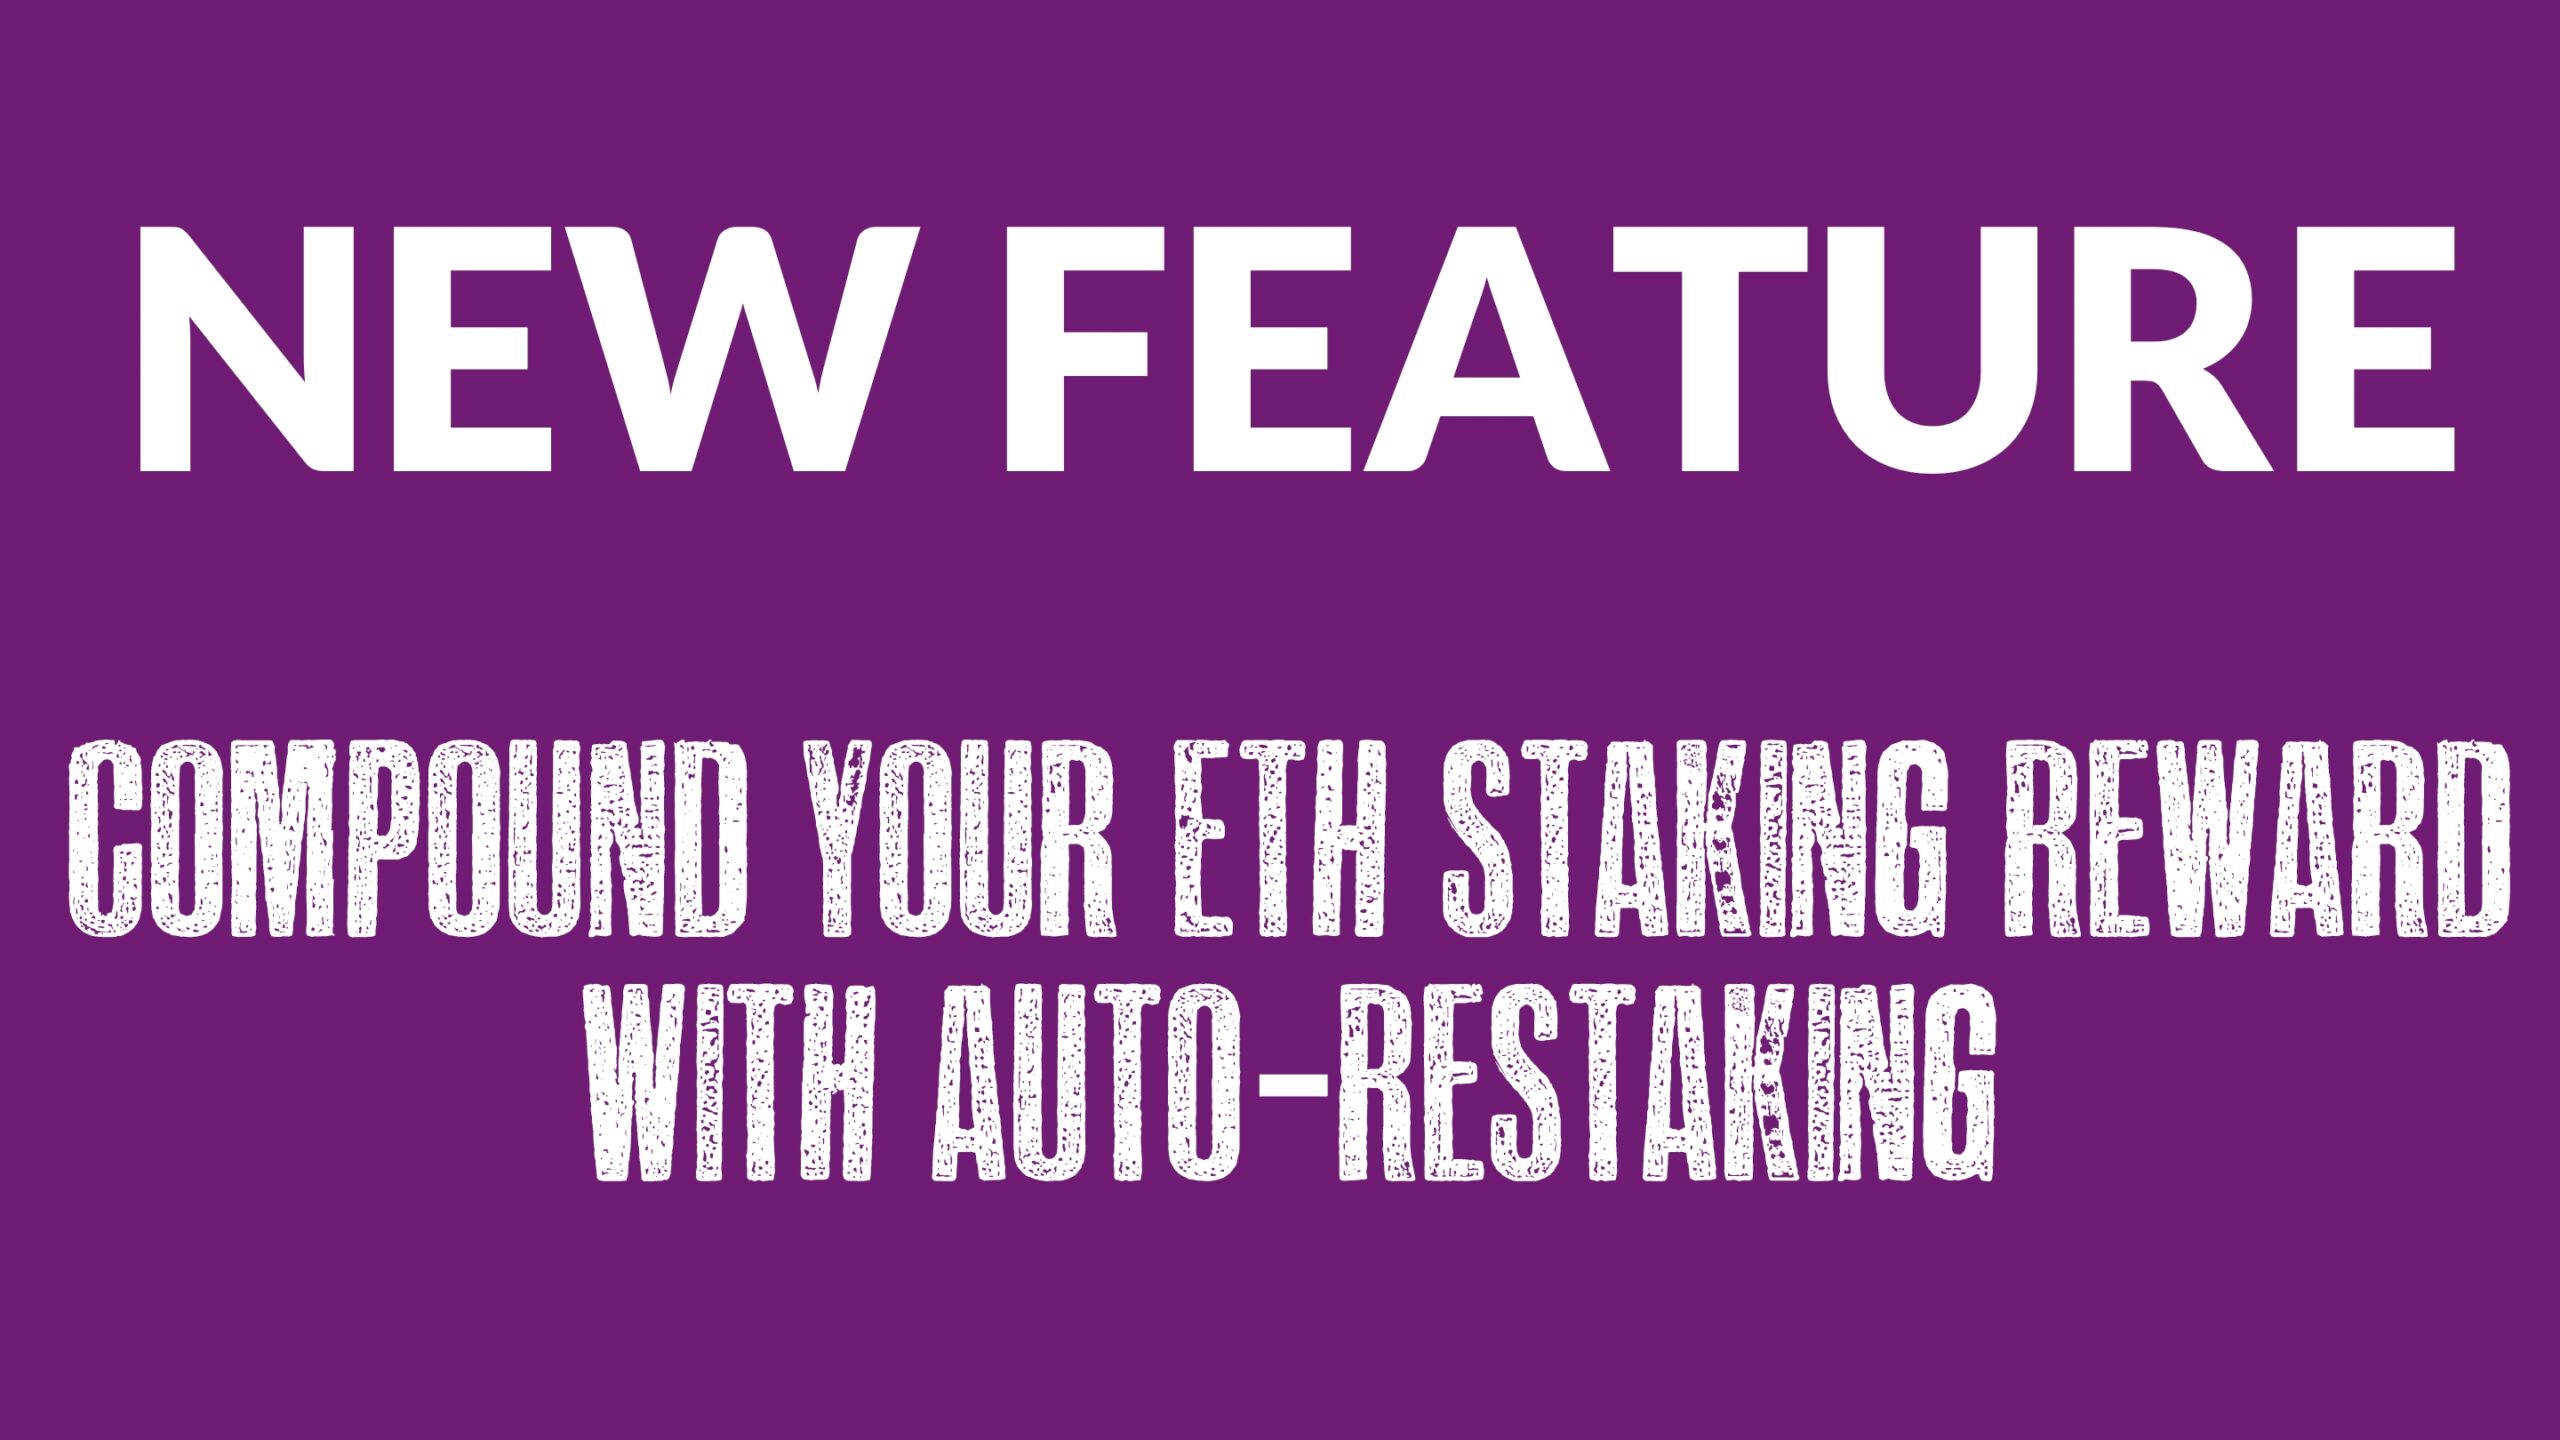 New Feature: Compound Your ETH Staking Rewards with Auto-Restaking!